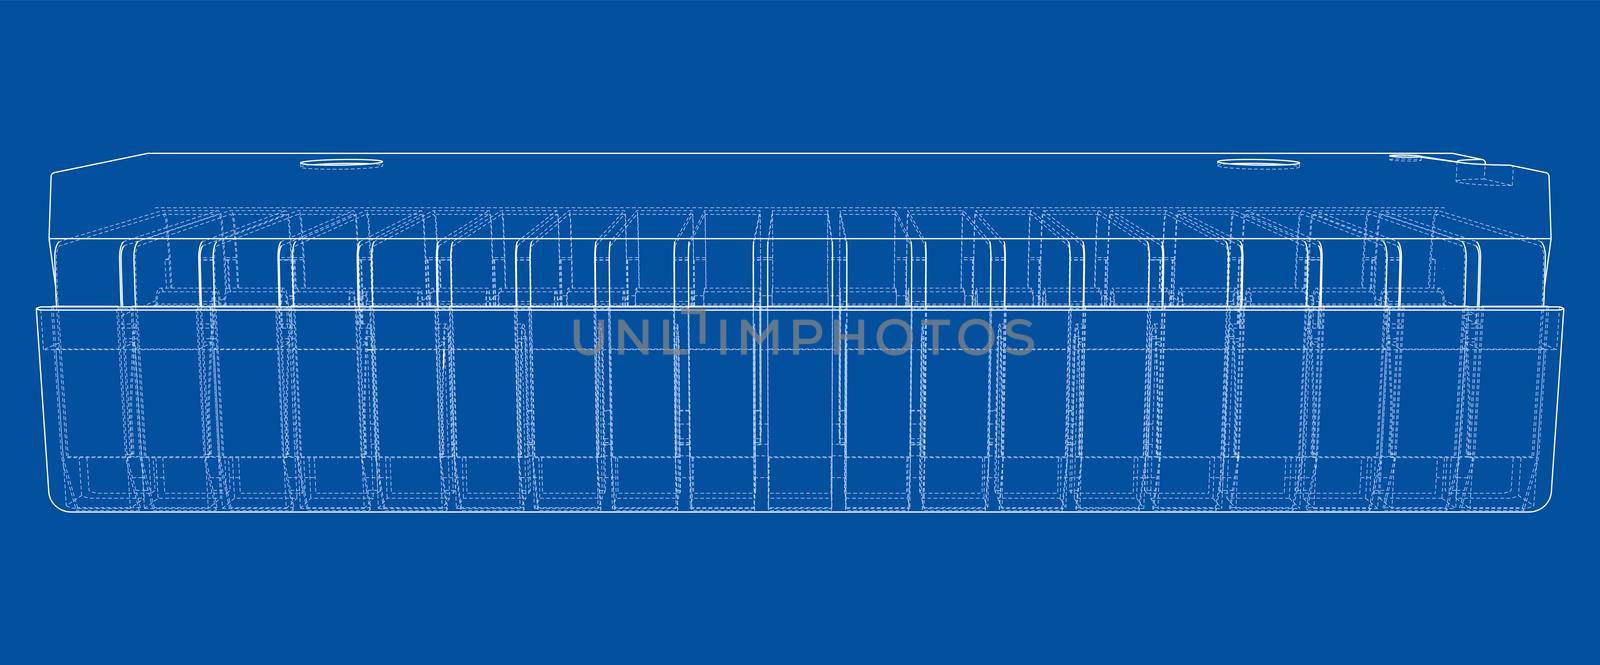 3D microchip. 3d illustration. Wire-frame or blueprint style